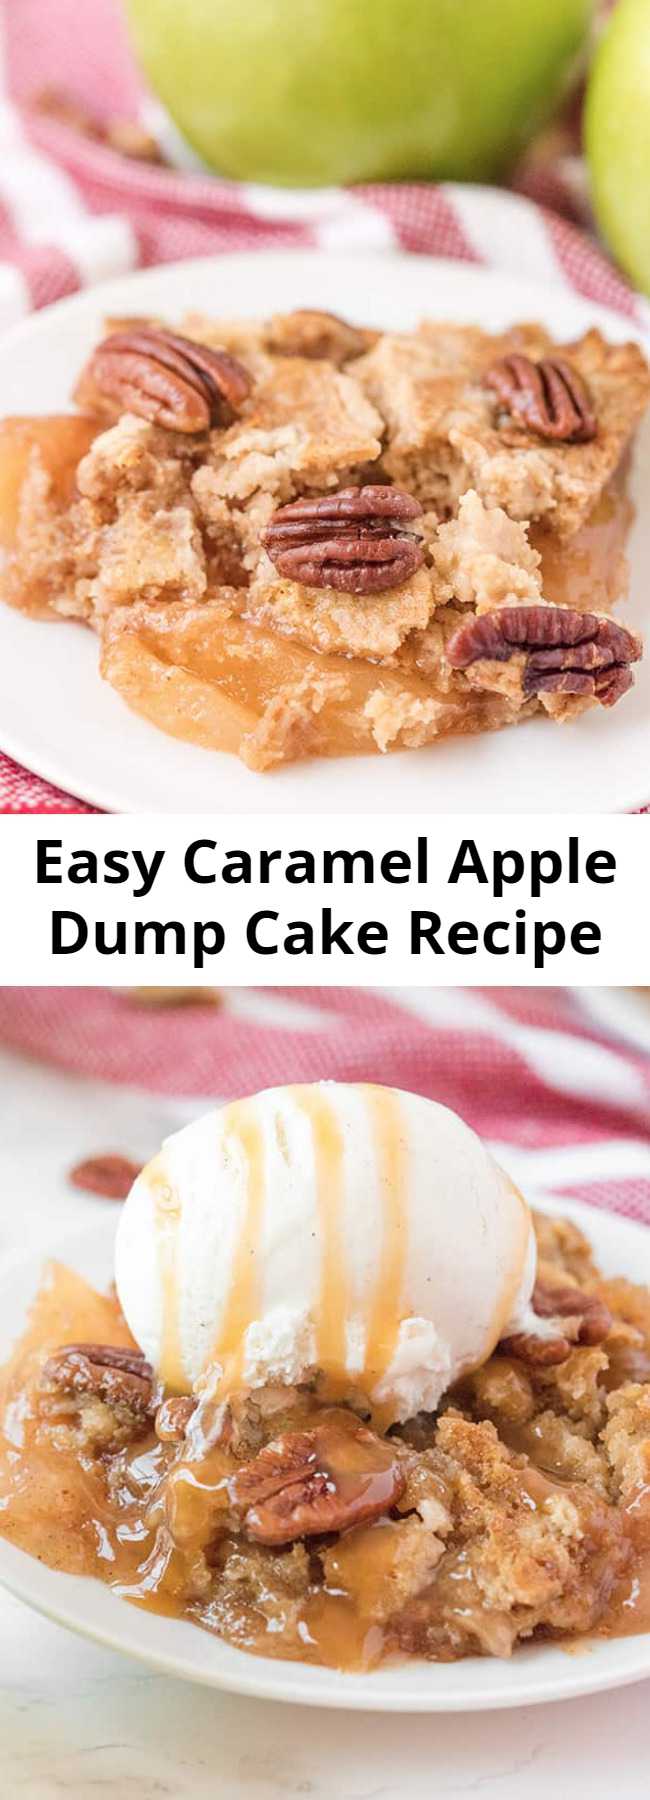 Easy Caramel Apple Dump Cake Recipe - SA simple recipe for Caramel Apple Dump cake made with butter pecan cake mix and apple pie filling! A tender and moist spiced cake with tender apples throughout topped with nuts and a caramel drizzle that is the perfect amount of sweetness. Add a scoop of ice cream or dollop of whipped cream and you have a straightforward dessert is crowd worthy. #dumpcake #caramel #apples